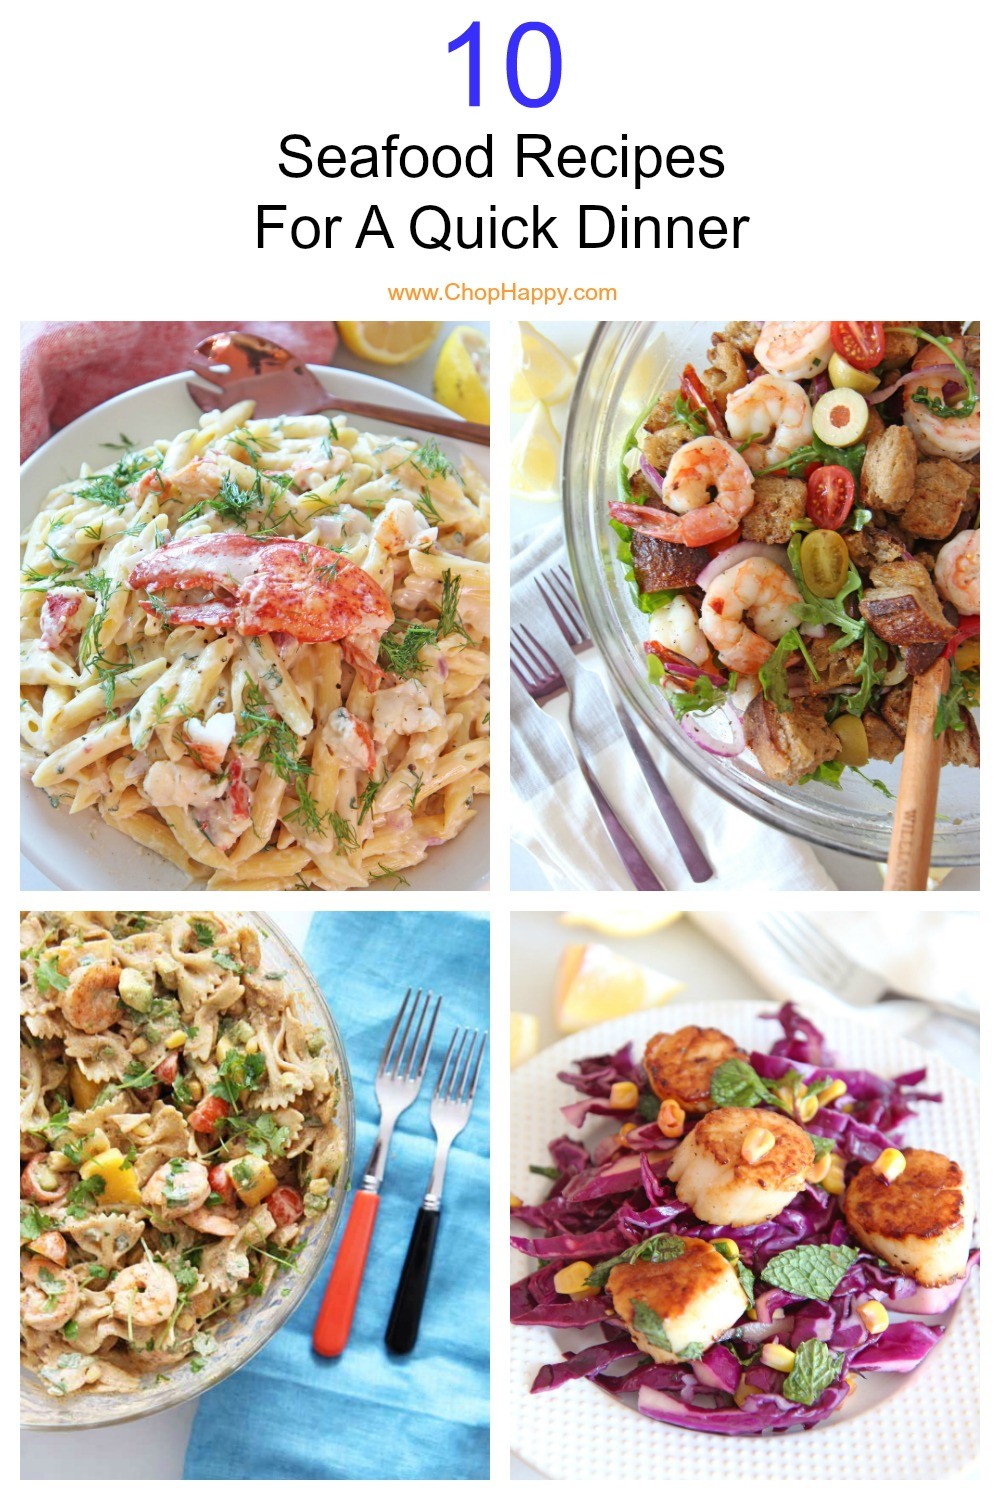 10 Seafood Recipe for a Quick Dinner Nothing better then seafood recipes to make a quick weeknight dinner special! Here are 10 recipes that are fast and simple. Seared scallops over slaw, lobster quesadillas, curry mussels, Lobster mac and cheese, and more seafood dinners. Happy Cooking! www.ChopHappy.com #seafoodrecipes #weeknightdinners